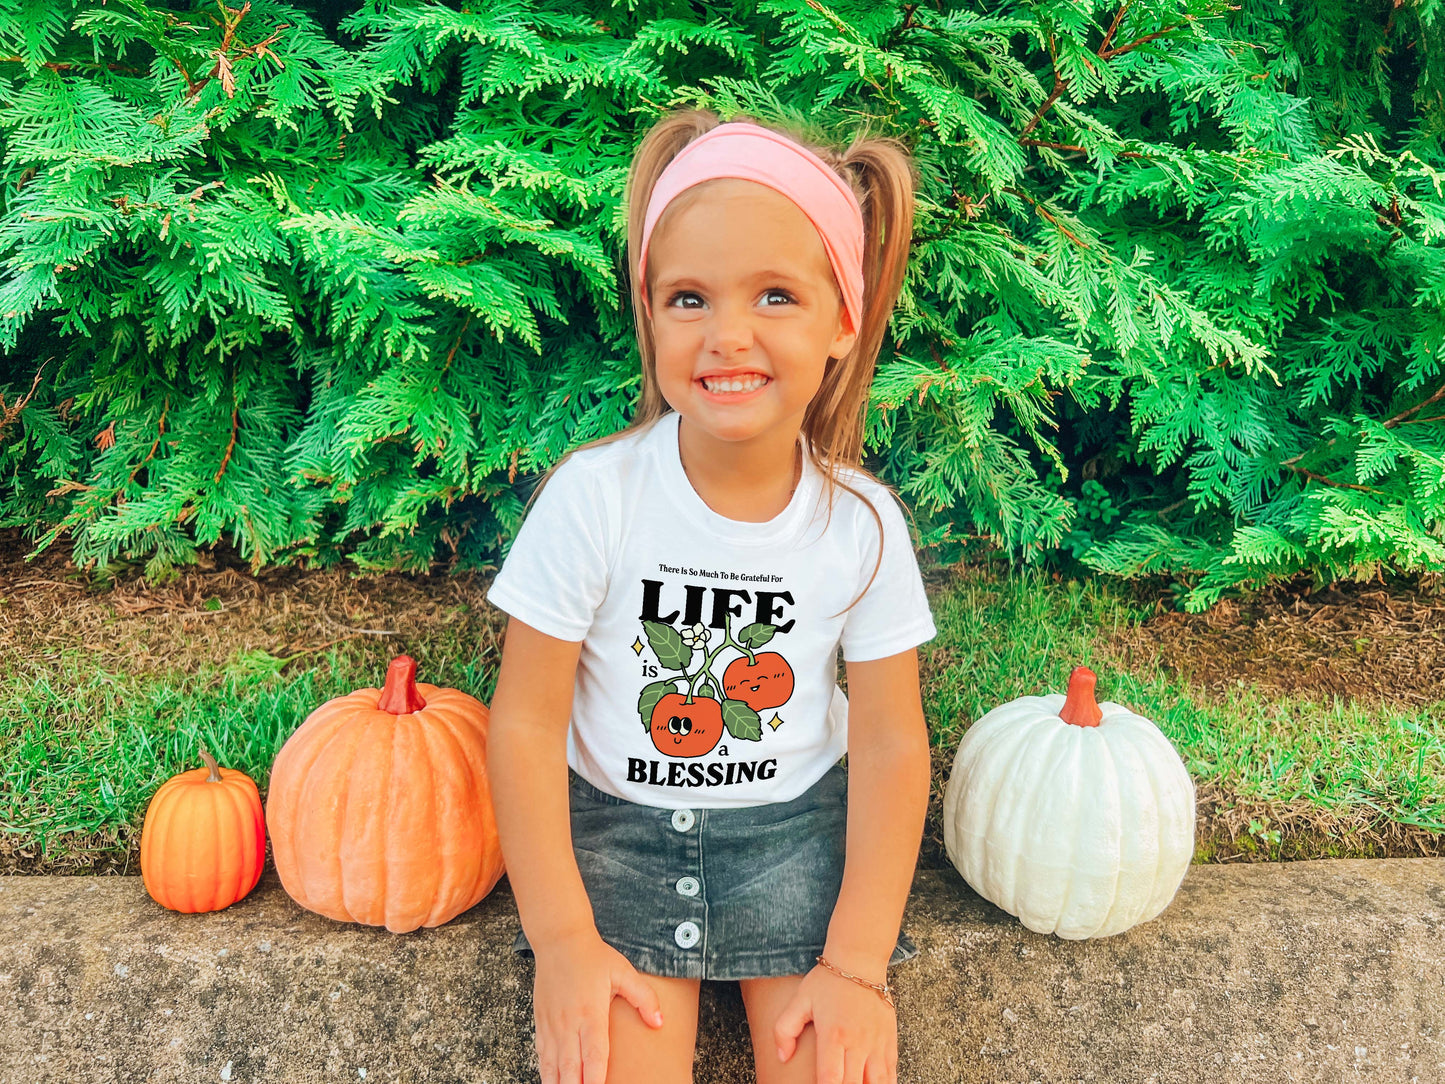 'Life is a Blessing' Kid's T-shirt